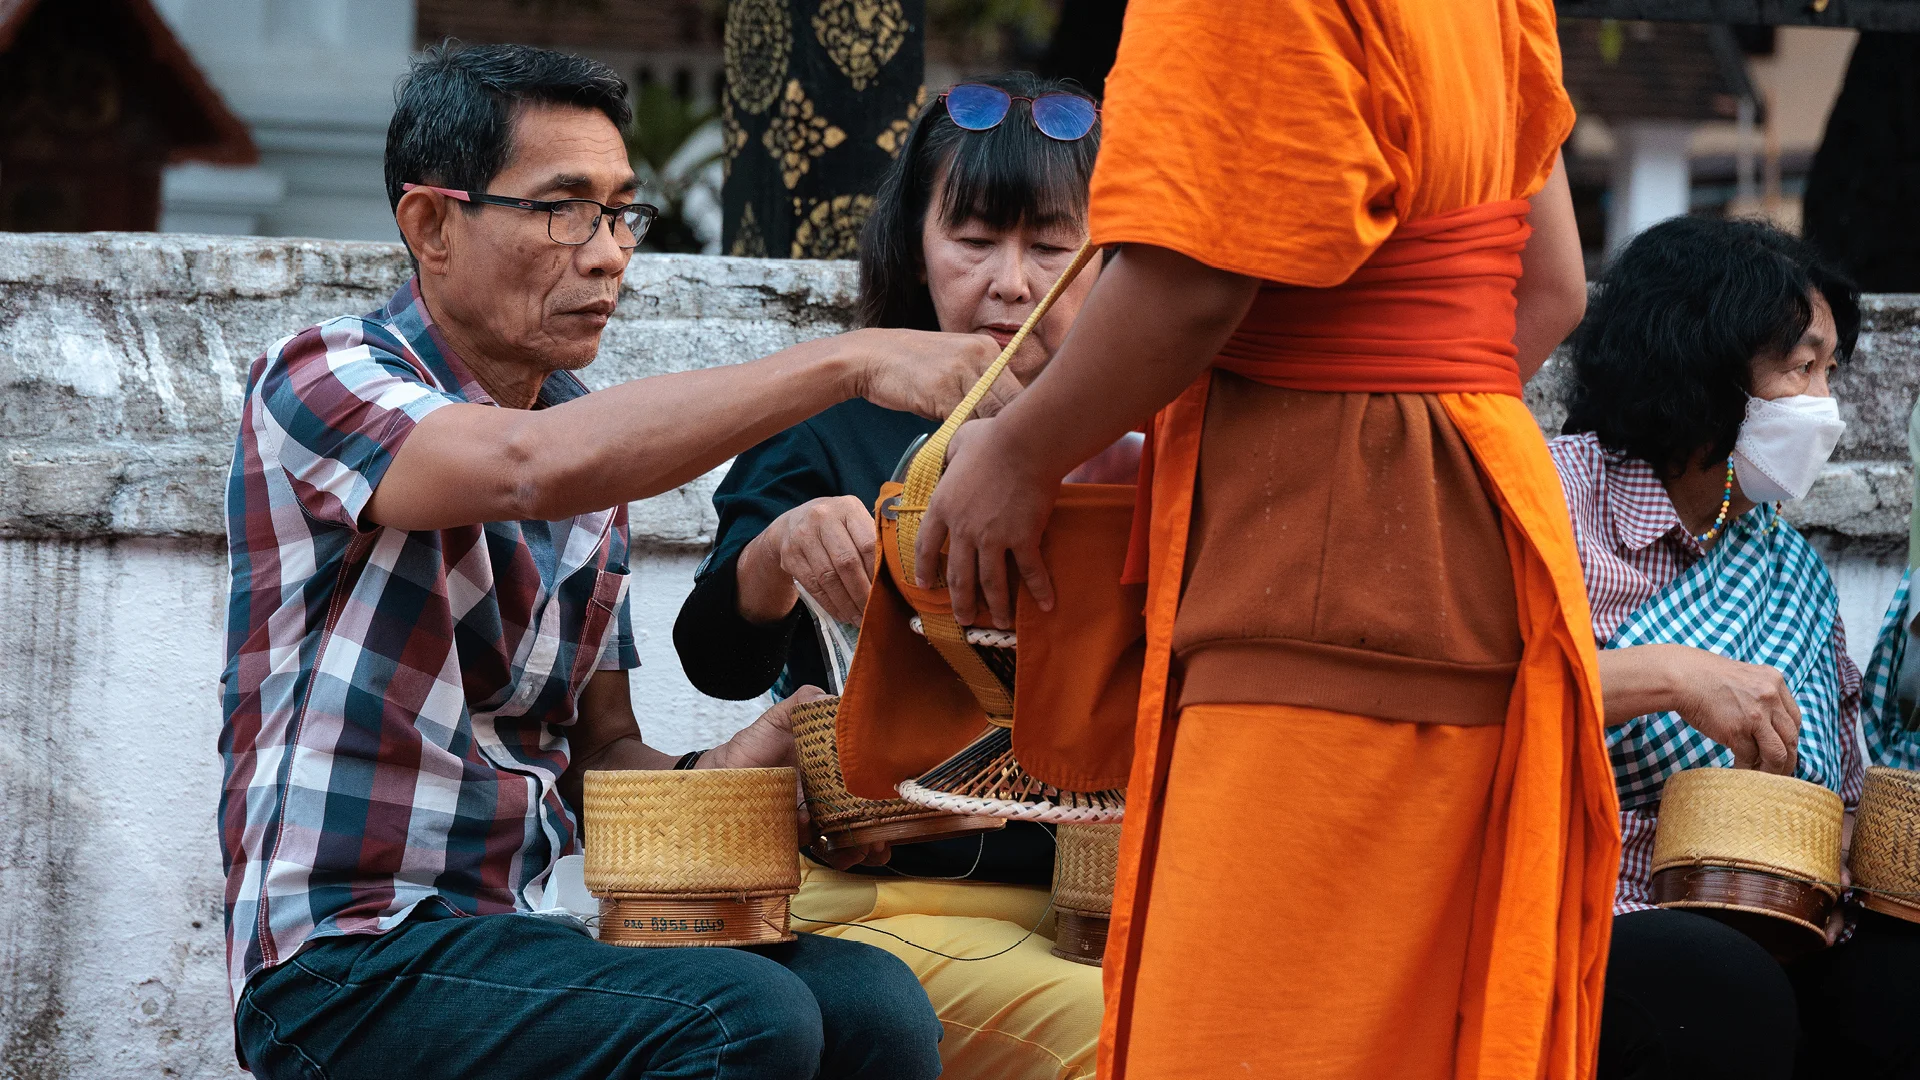 Monk recieving food in Luang Prabang during the alms ceremony